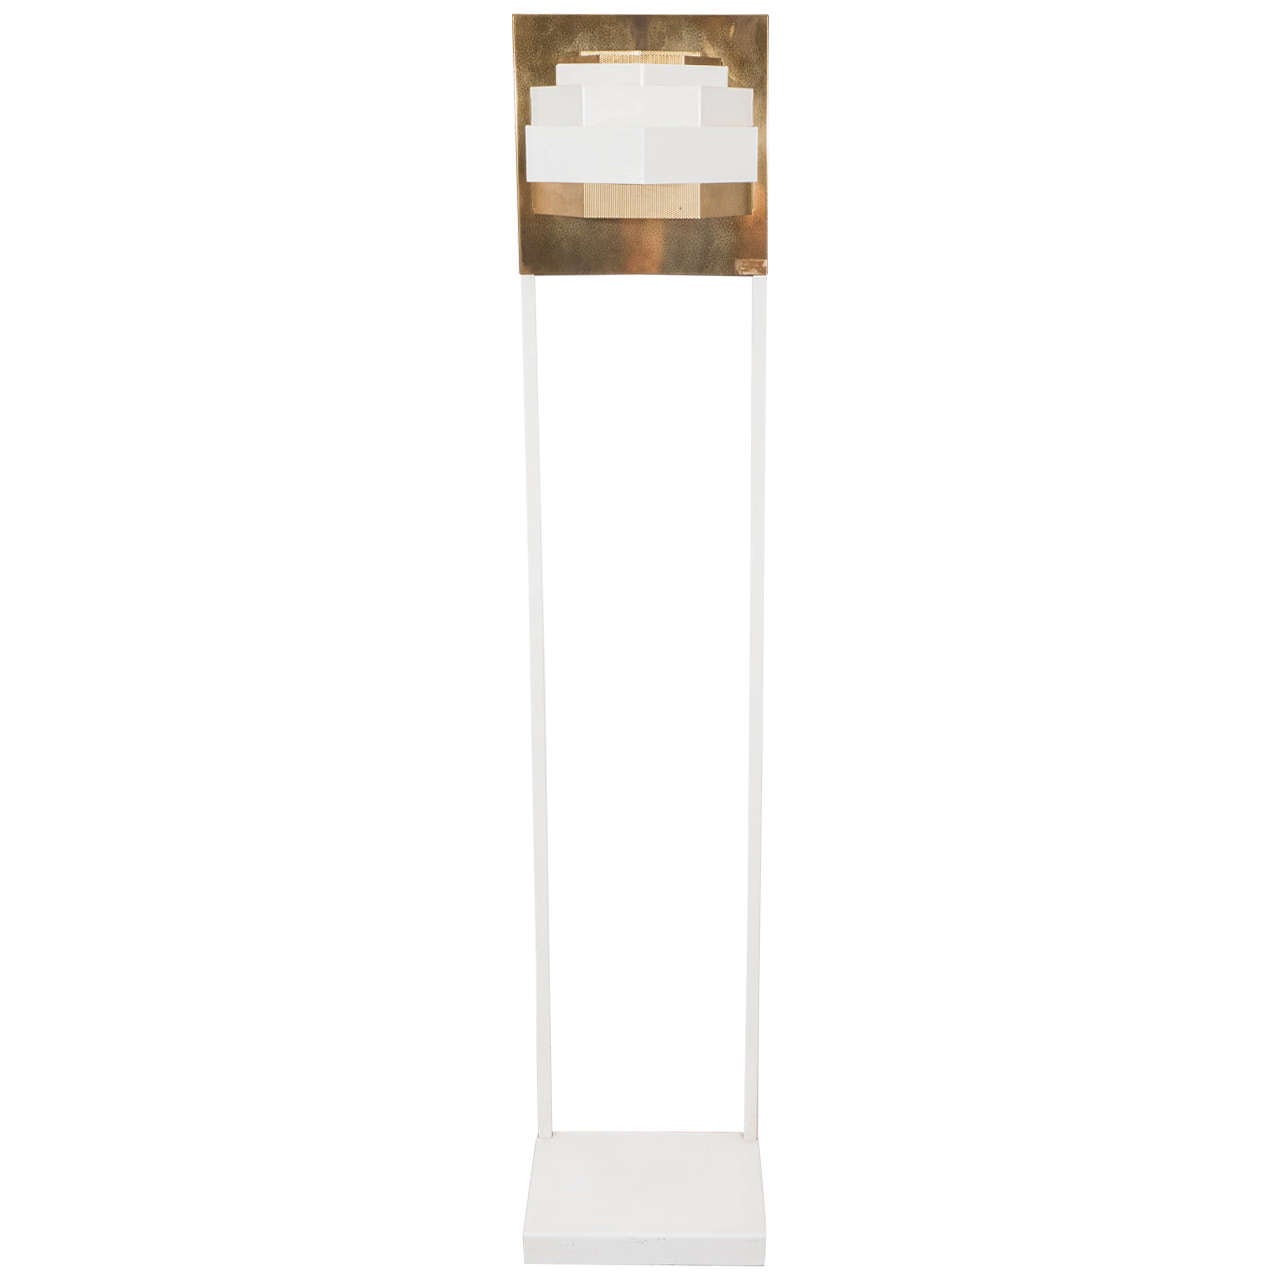 A Midcentury Sculptural Floor Lamp in White Enamel and Brass